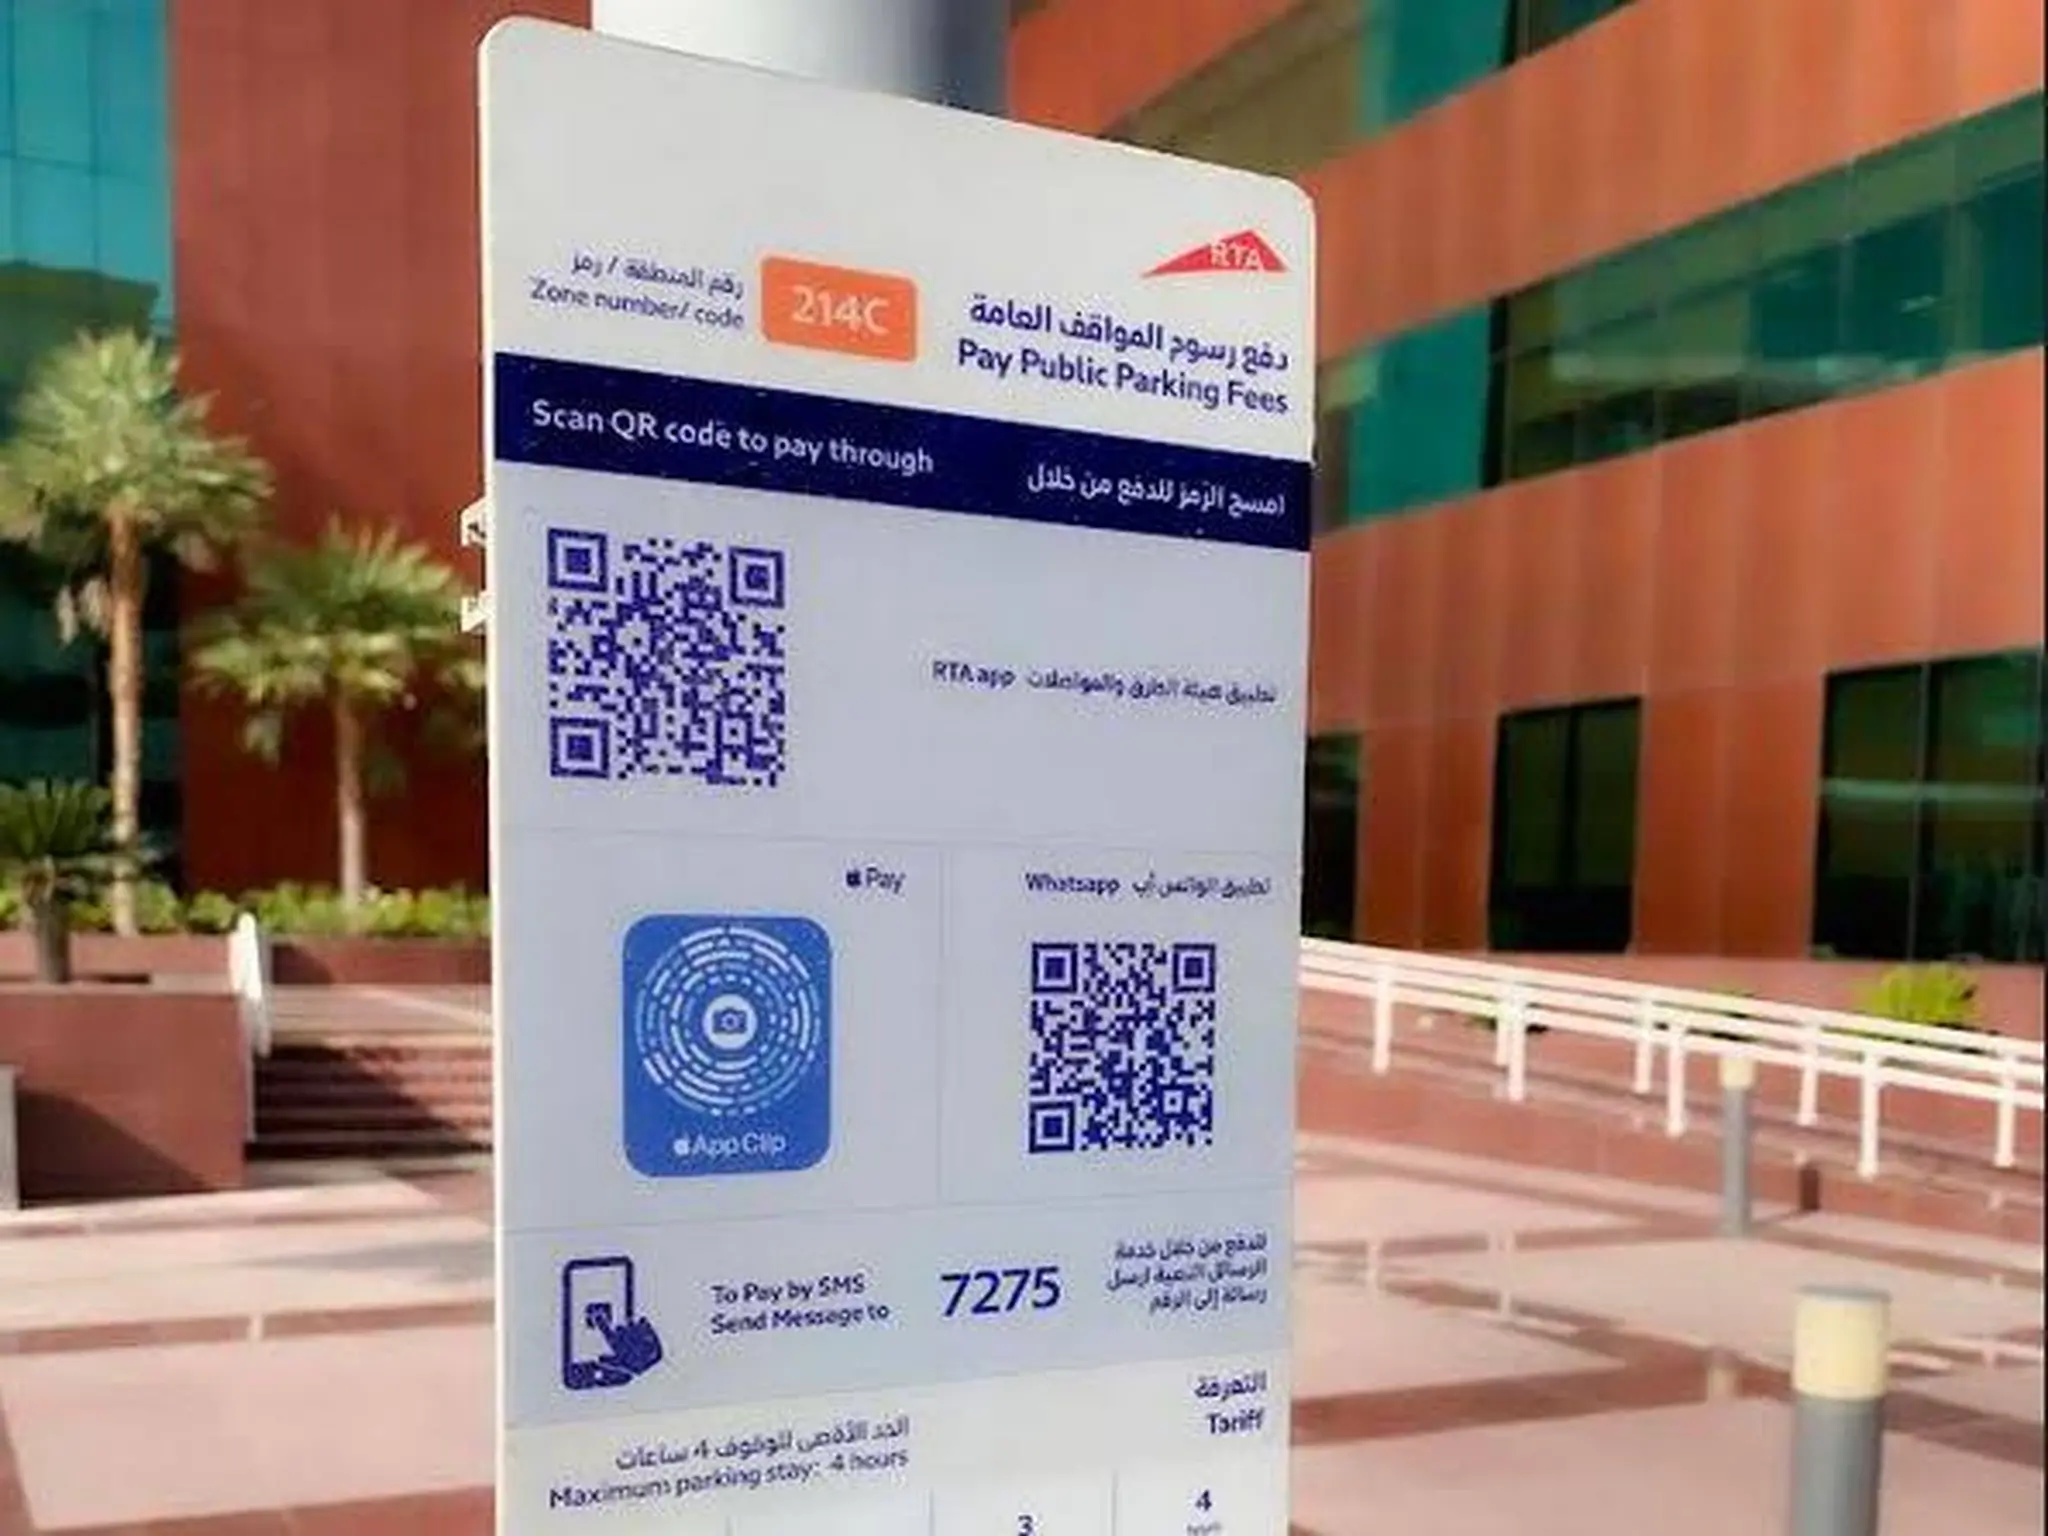 Details of the new system for paying parking fees in Dubai